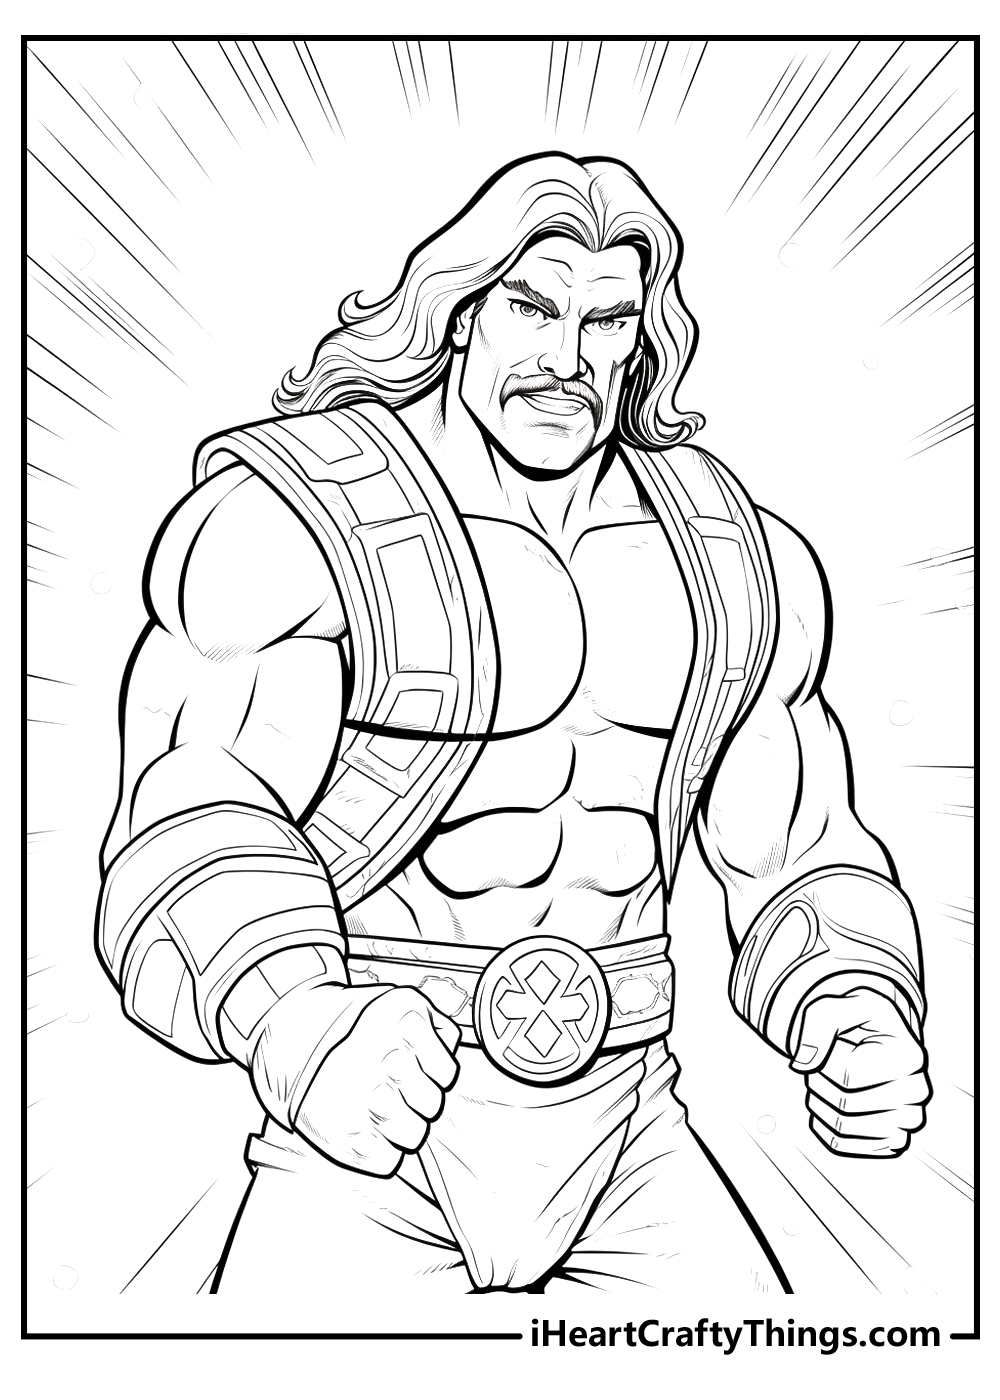 new WWE coloring pages